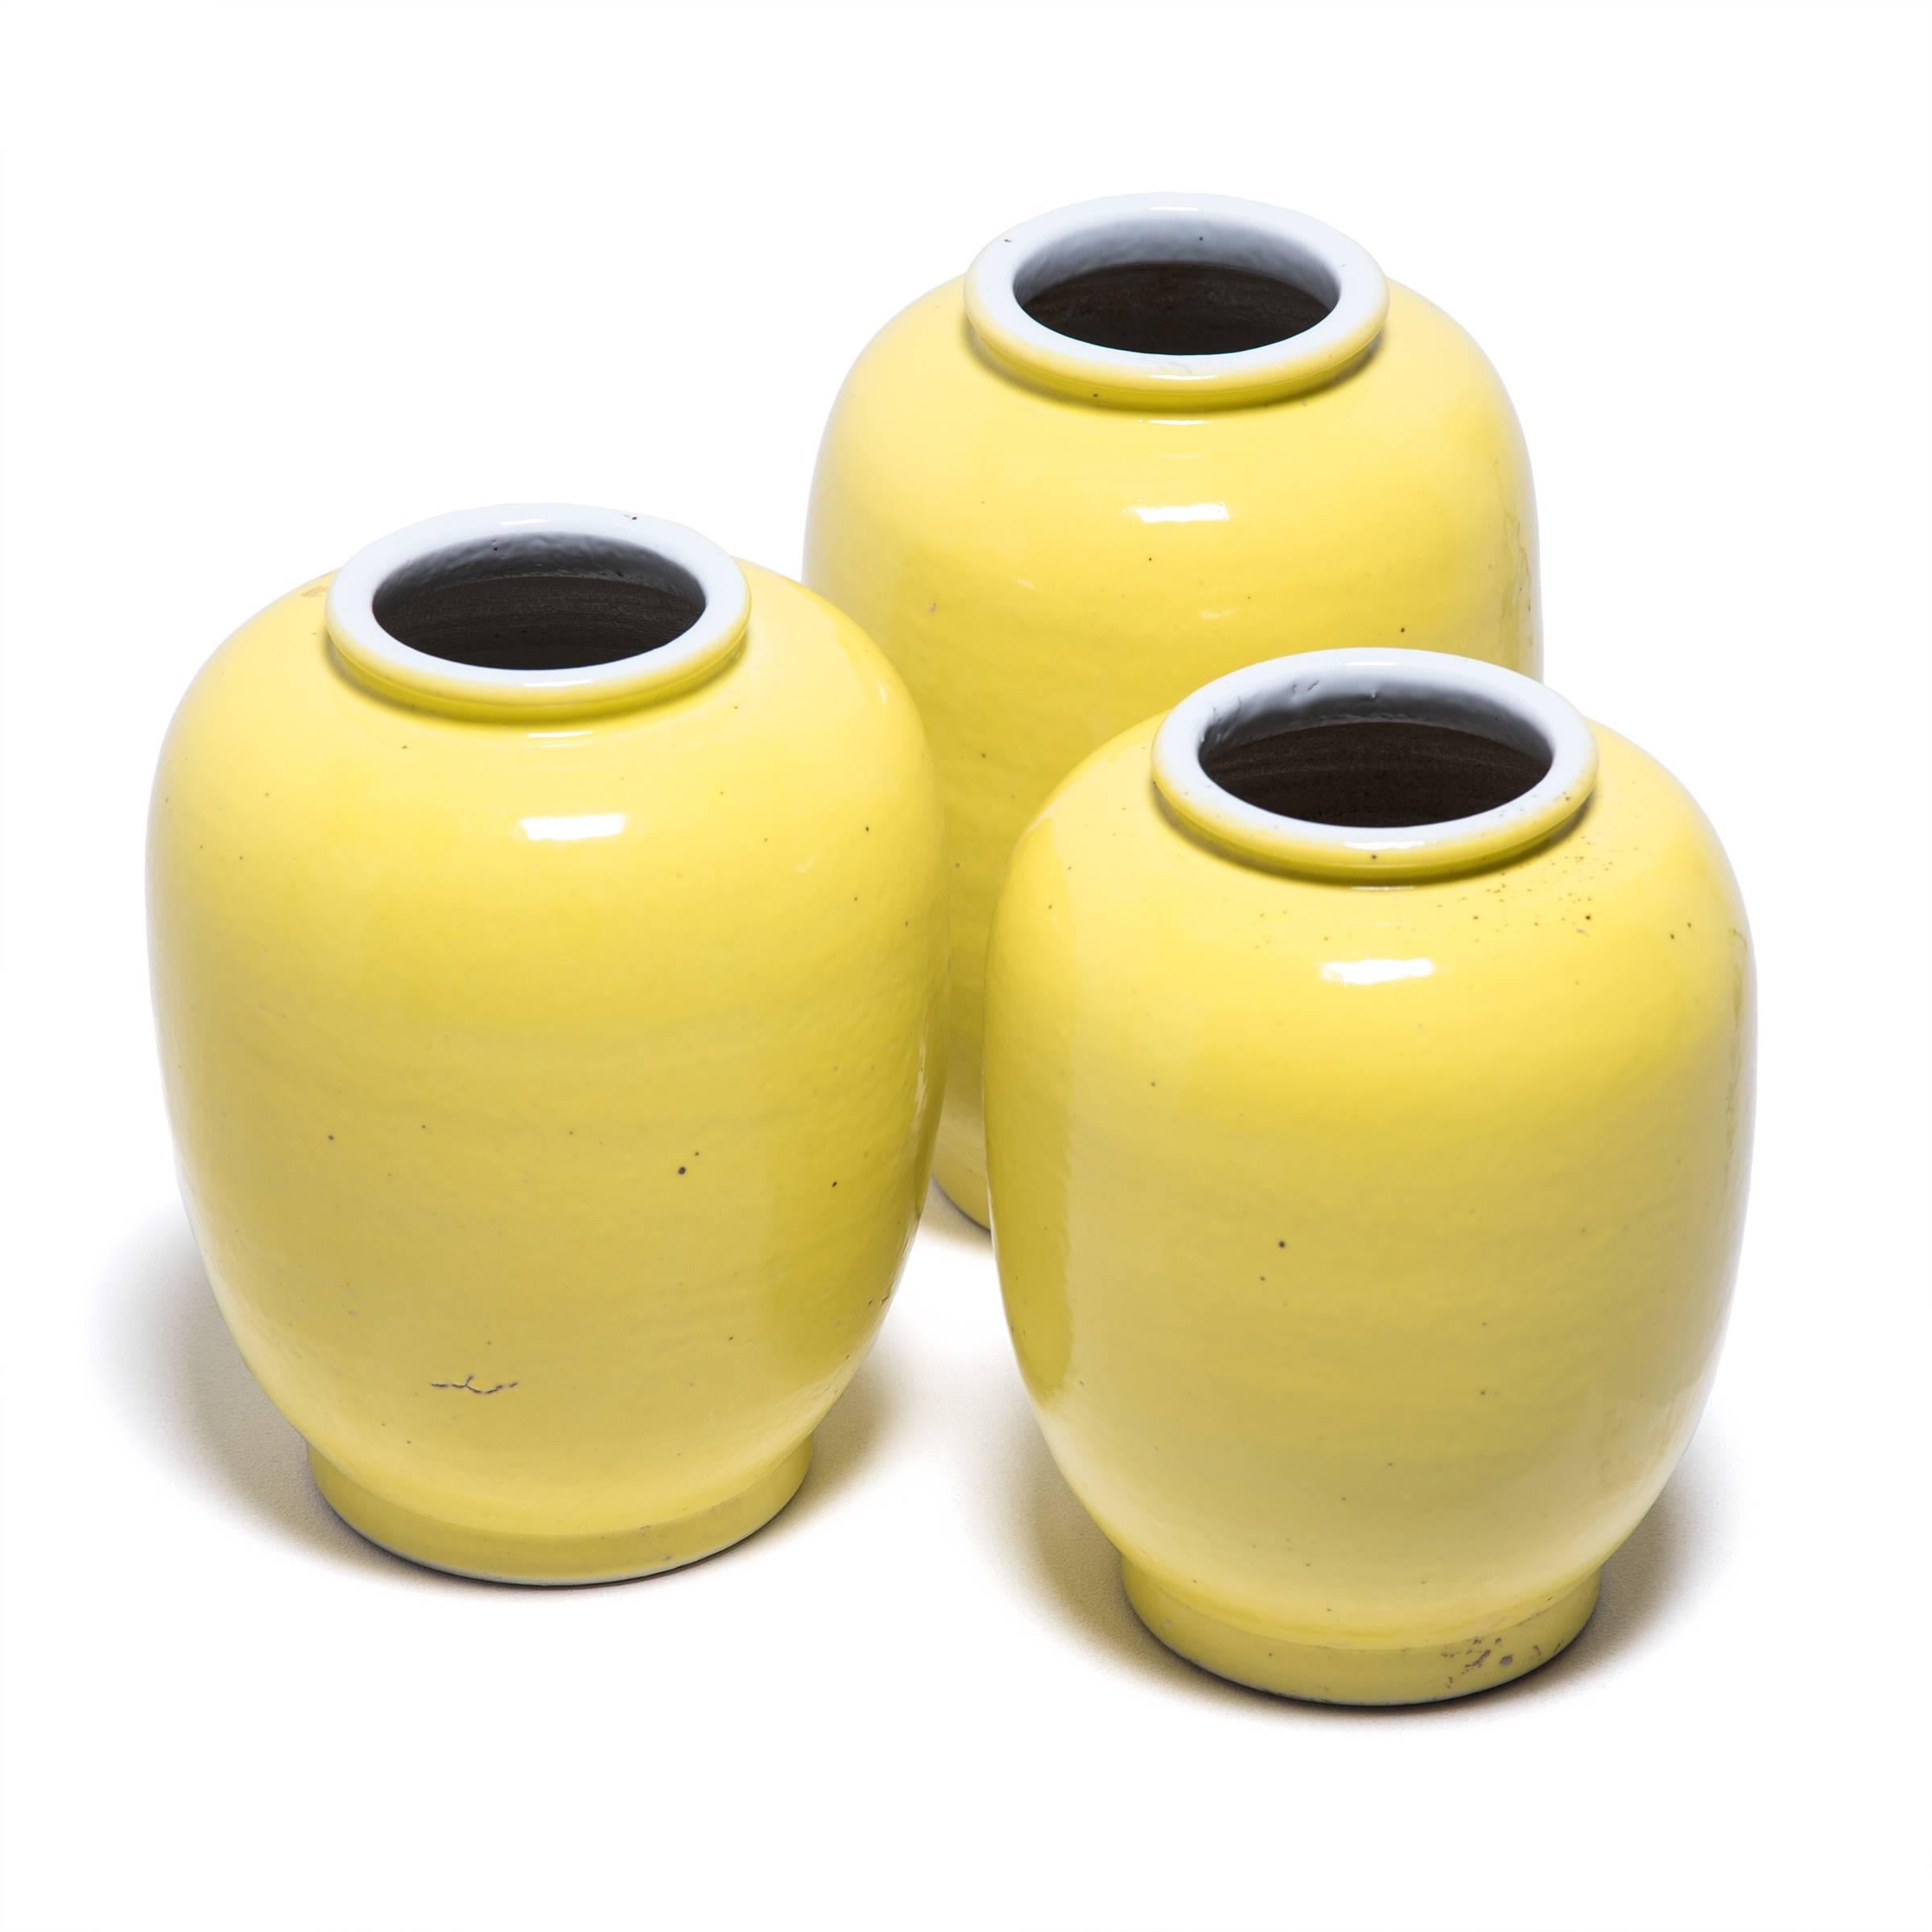 Chinese porcelain was exotic, the colors were beautiful and bright, gifted ceramicists made designs that were durable and useful and the craze to collect them spread across the world in the 1700s. This trio of beautiful salt jars is a more modern